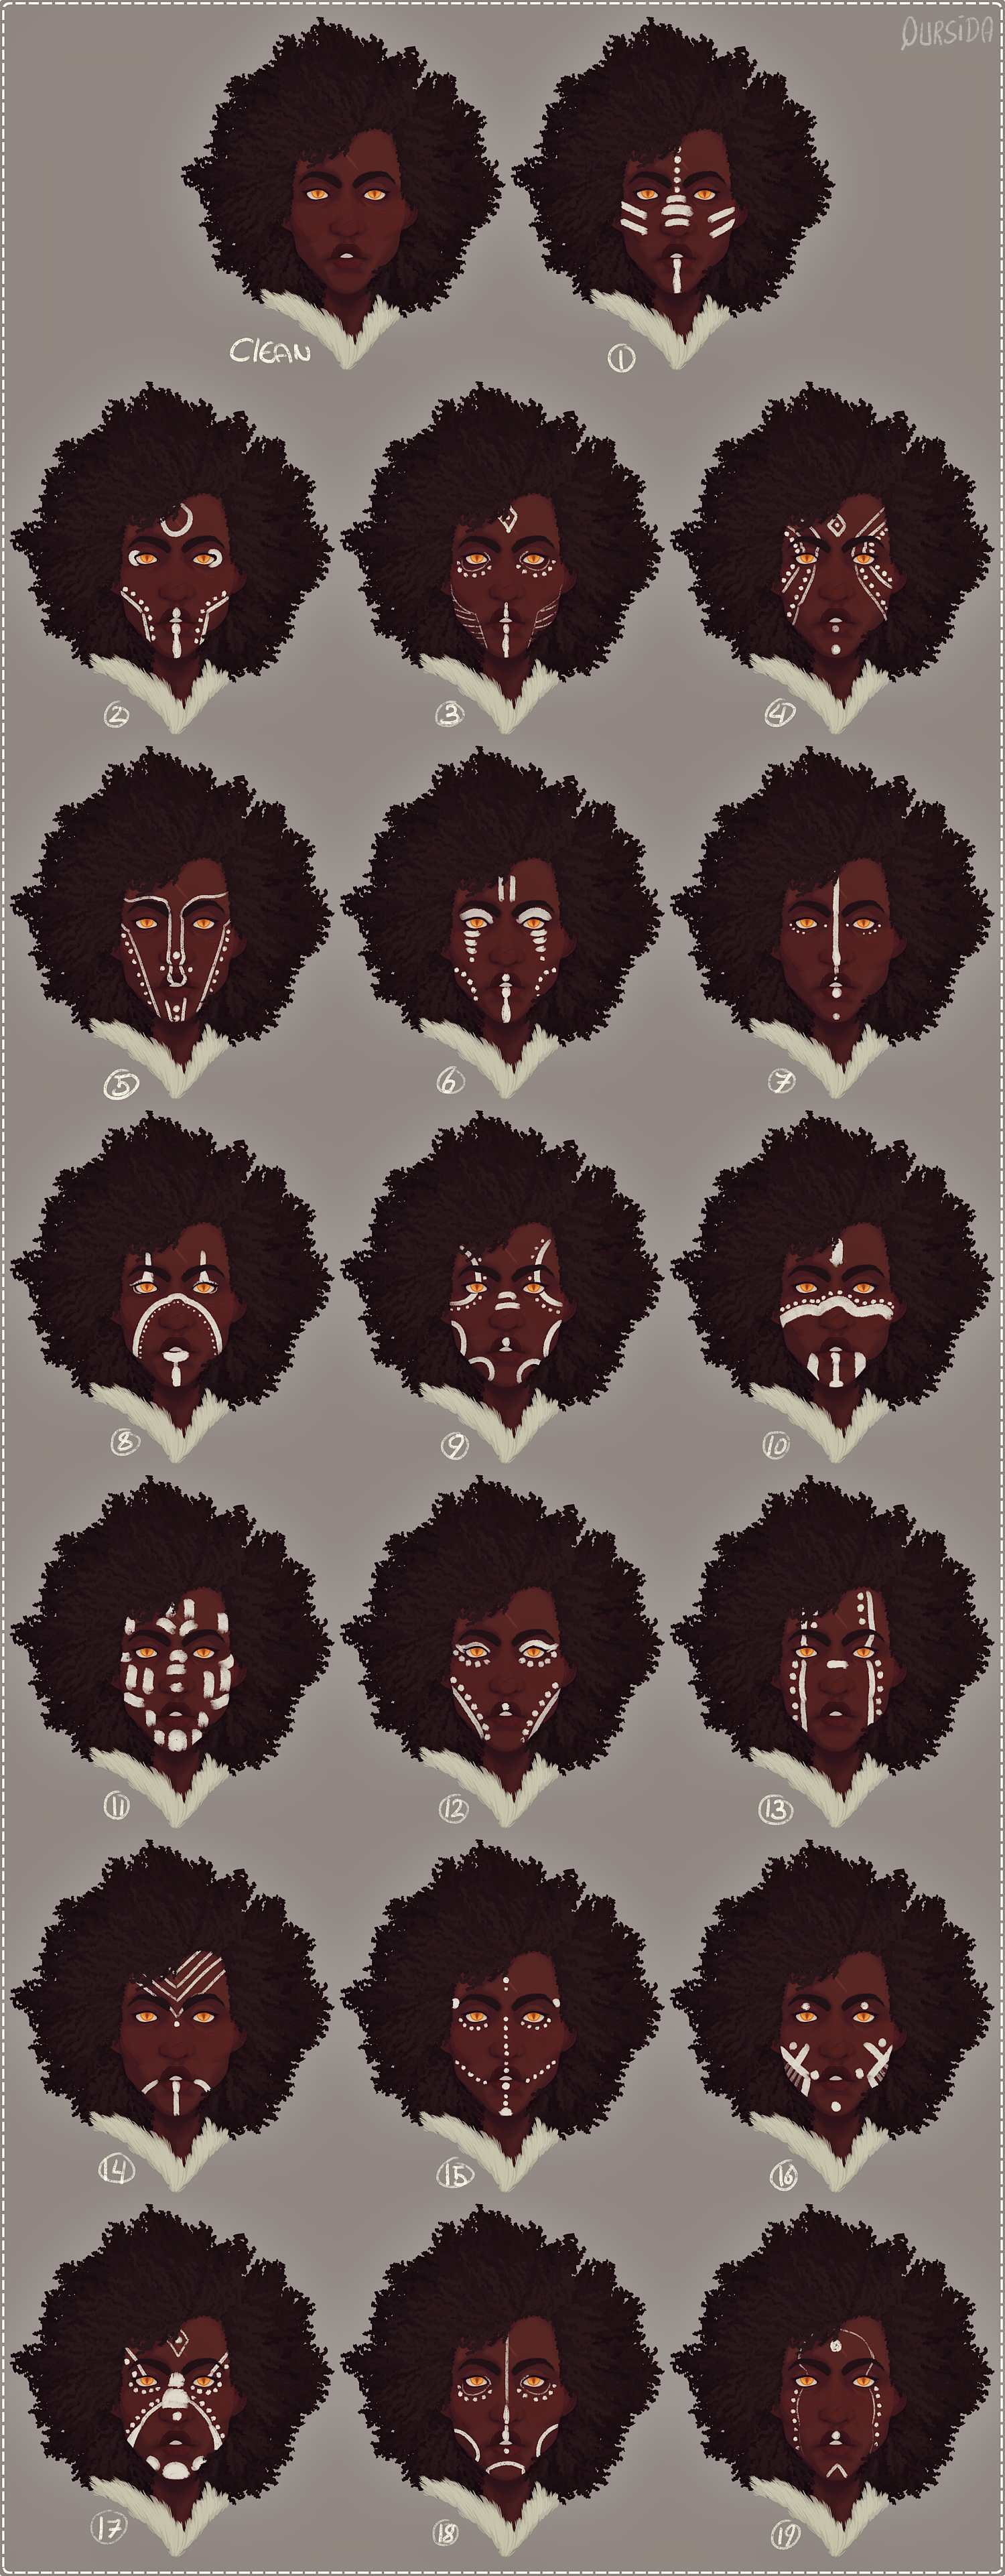 [OOTH] Asger's Face paint concepts